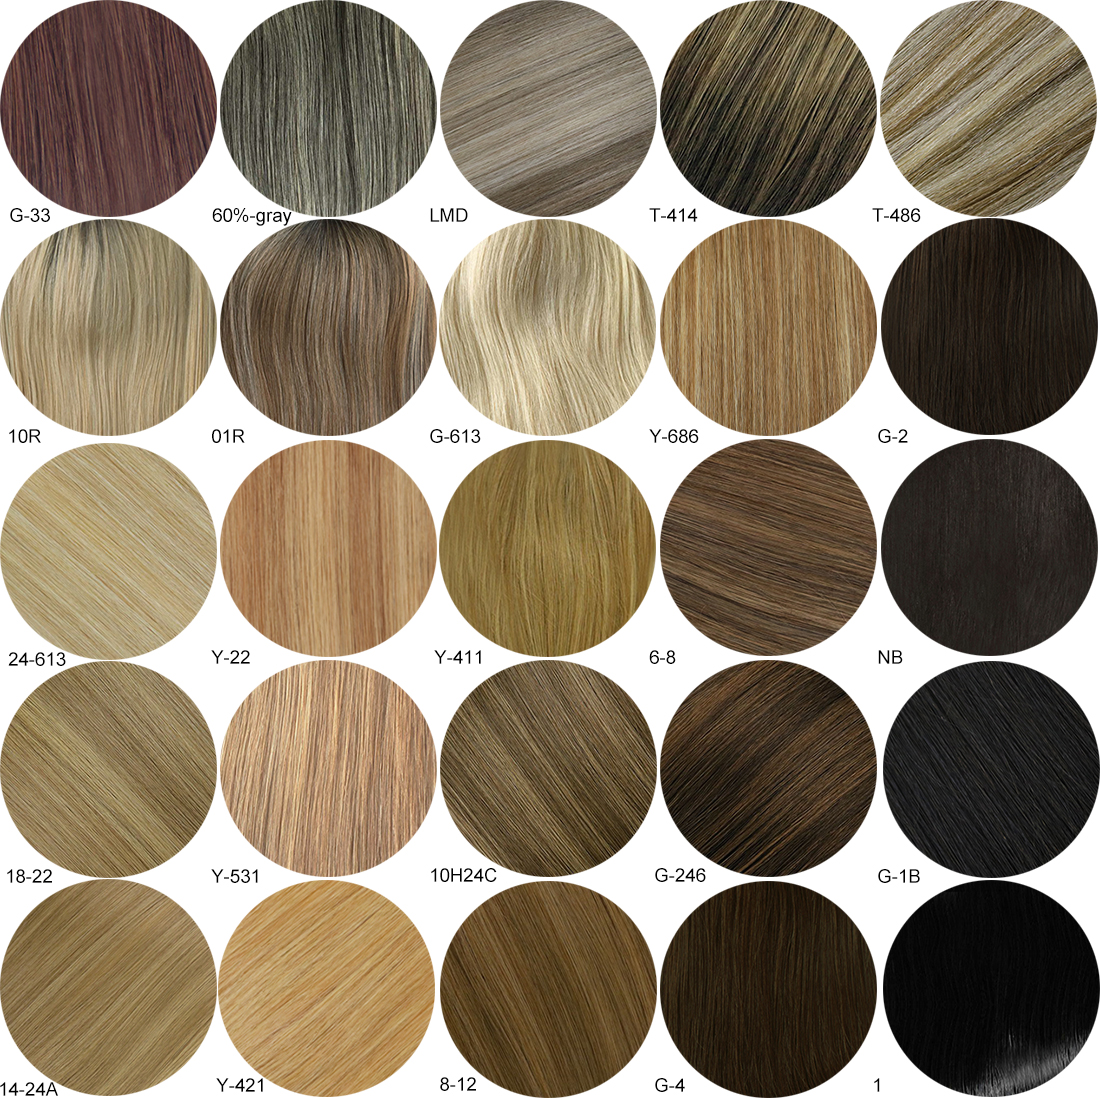 White Hair Color Chart Barta Innovations2019 Org